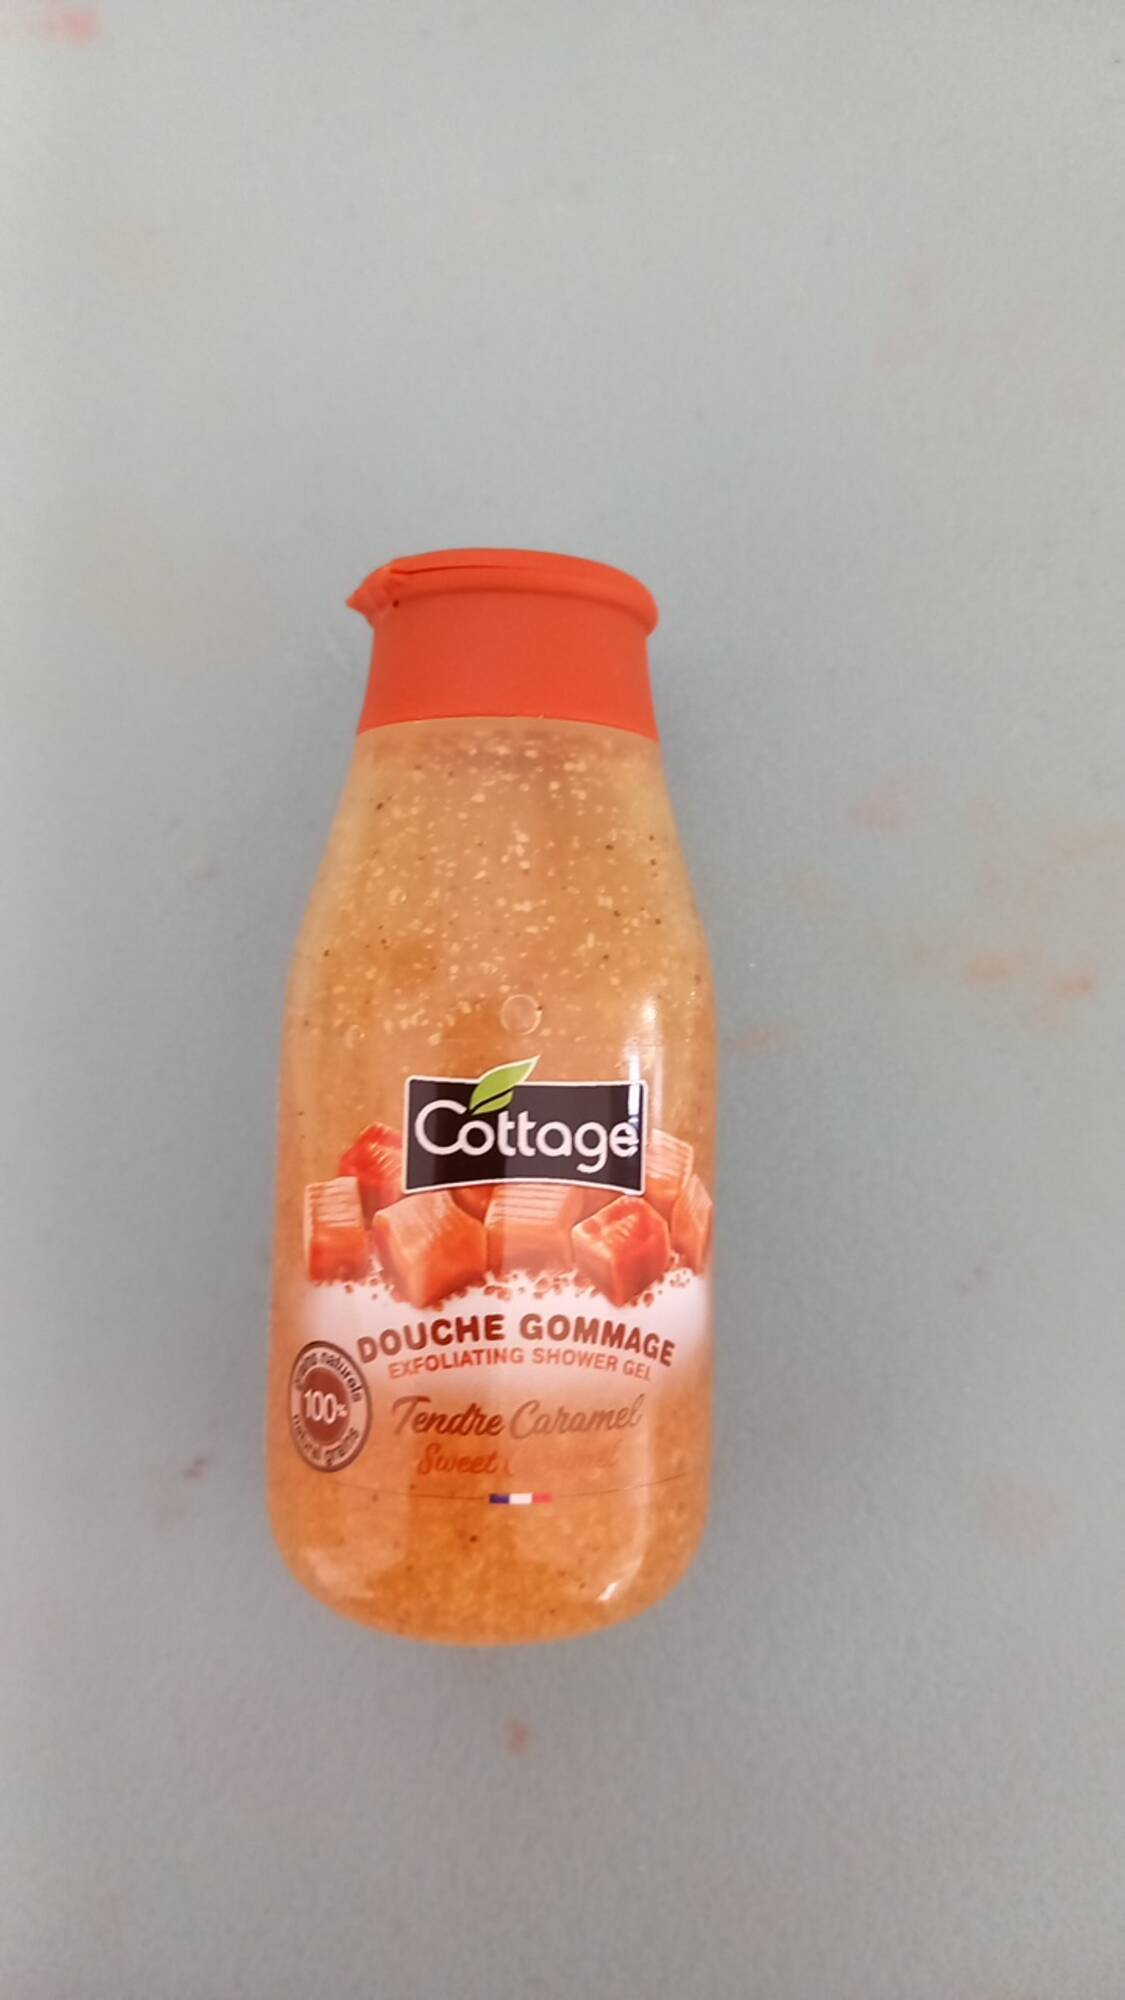 COTTAGE - Tendre caramel su - Douche gommage